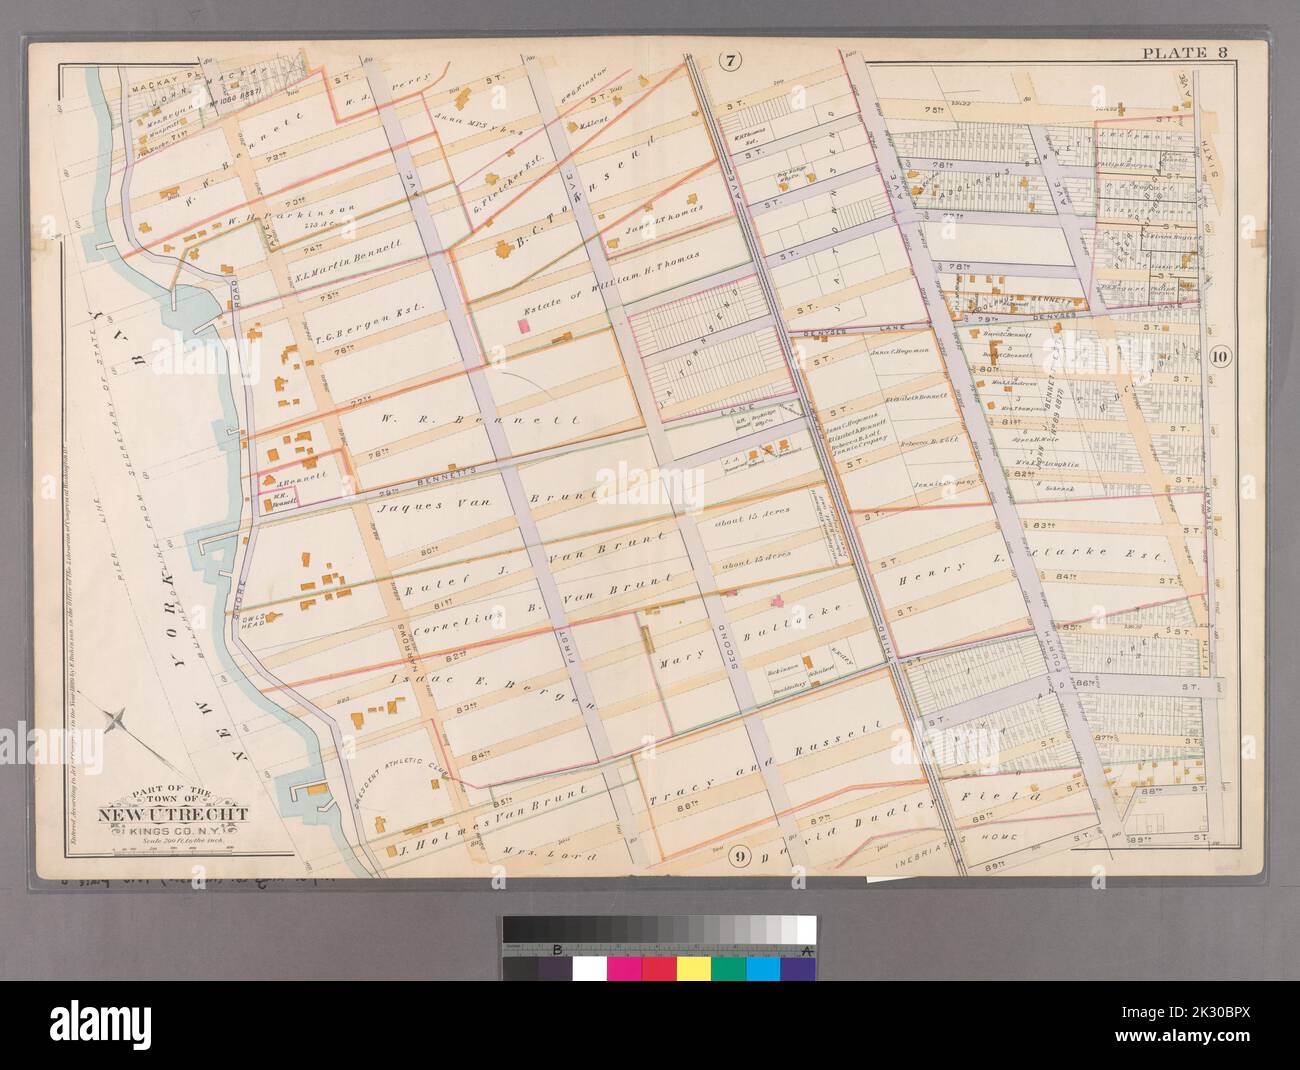 F. Bourquin & Co.. Cartografica, Mappe. 1890. Lionel Pincus e la Principessa Firyal Map Division. Brooklyn (New York, N.Y.), Real Property , New York (state) , New York Plate 8: Bounded by Mackay Place, Narrows Avenue, 71st Street, First Avenue, 72nd Street, Second Avenue, 73rd Street, Third Avenue, 74th Street, Fourth Avenue, 75th Street, Stewart Avenue, 89th Street, Third Avenue, 87th Street, First Avenue, 86th Street, Narrows Avenue, 85th Street e Shore Road. Parte della città di New Utrecht, Kings Co., N.Y. Foto Stock